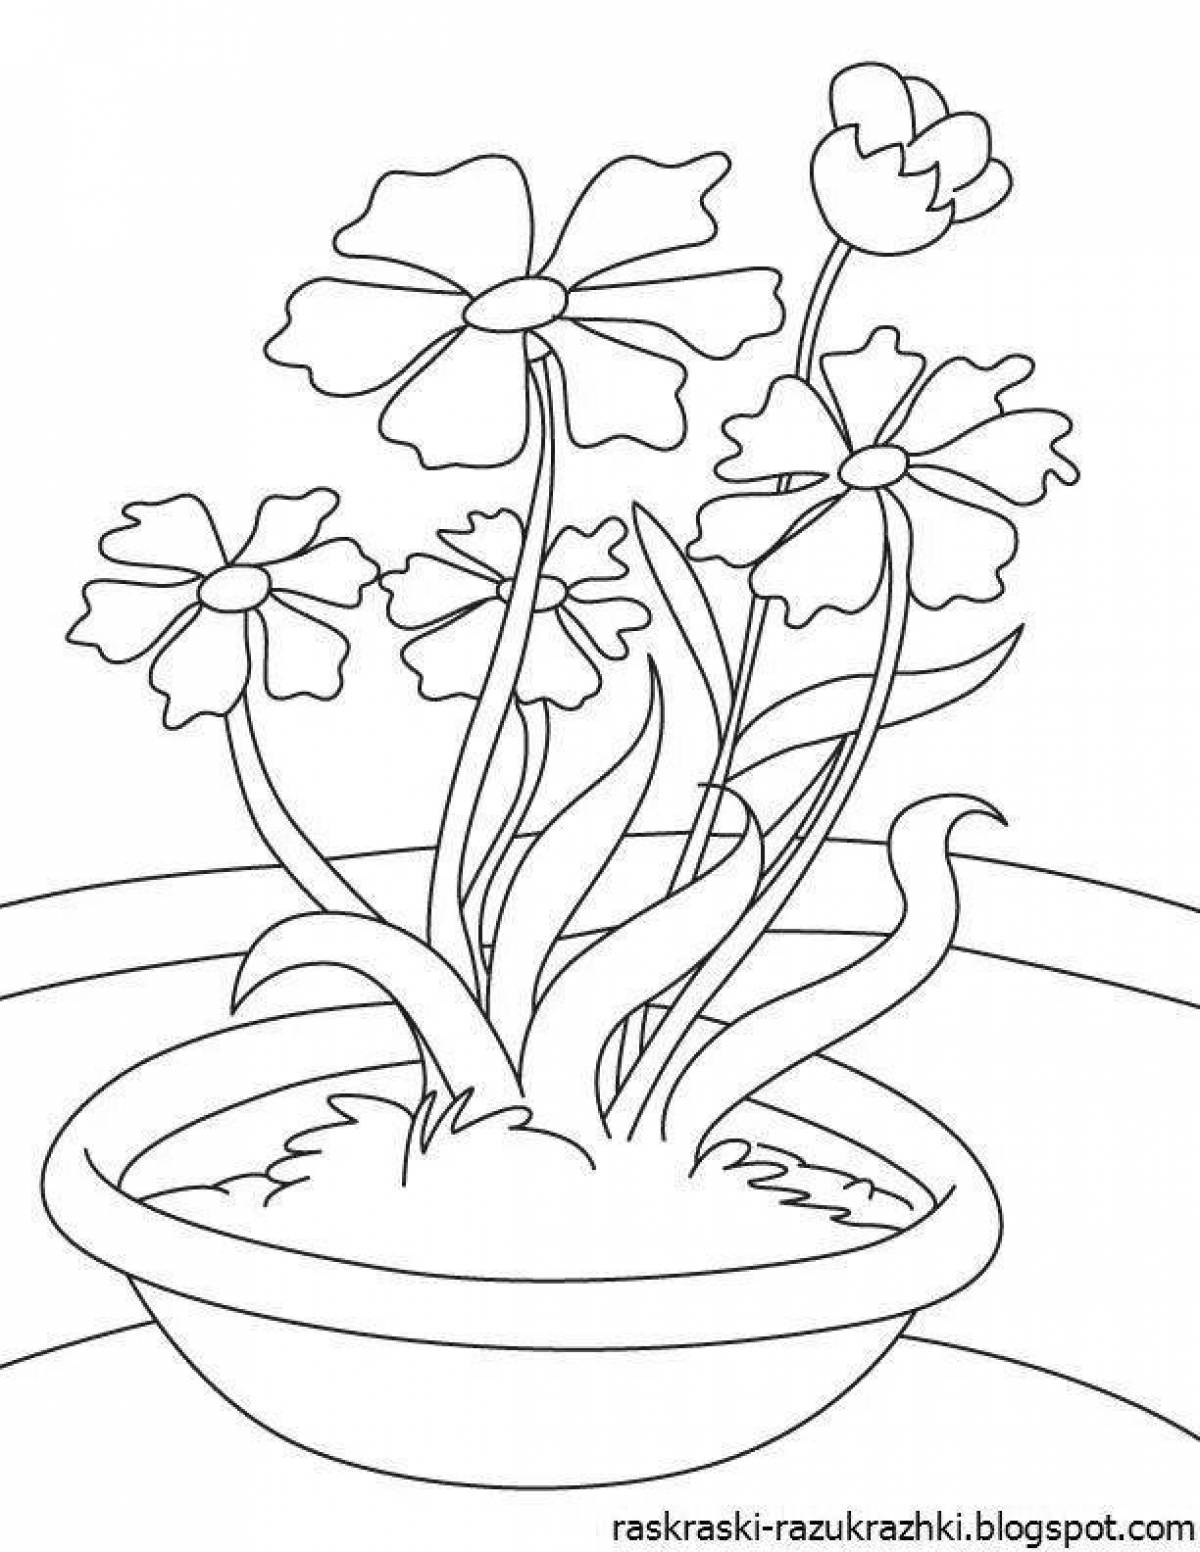 Great coloring room flowers